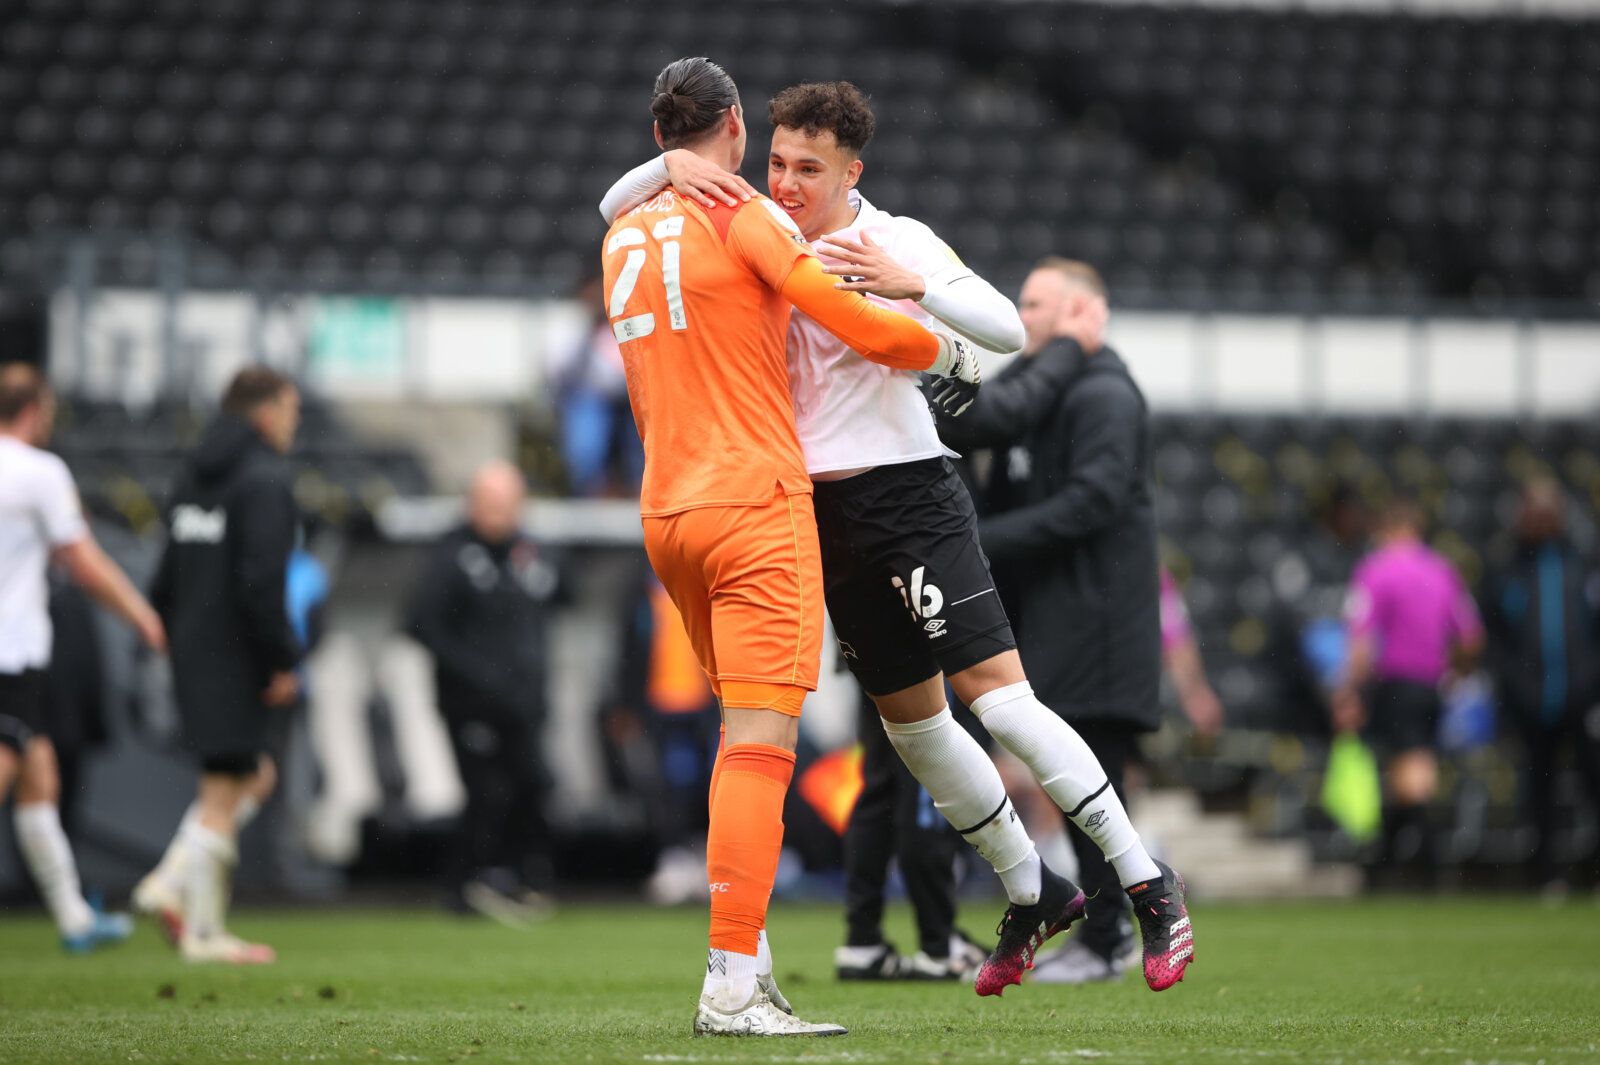 Soccer Football - Championship - Derby County v Sheffield Wednesday - Pride Park, Derby, Britain - May 8, 2021 Derby County's Lee Buchanan and Kelle Roos celebrate after the match Action Images/Molly Darlington EDITORIAL USE ONLY. No use with unauthorized audio, video, data, fixture lists, club/league logos or 'live' services. Online in-match use limited to 75 images, no video emulation. No use in betting, games or single club /league/player publications.  Please contact your account representat